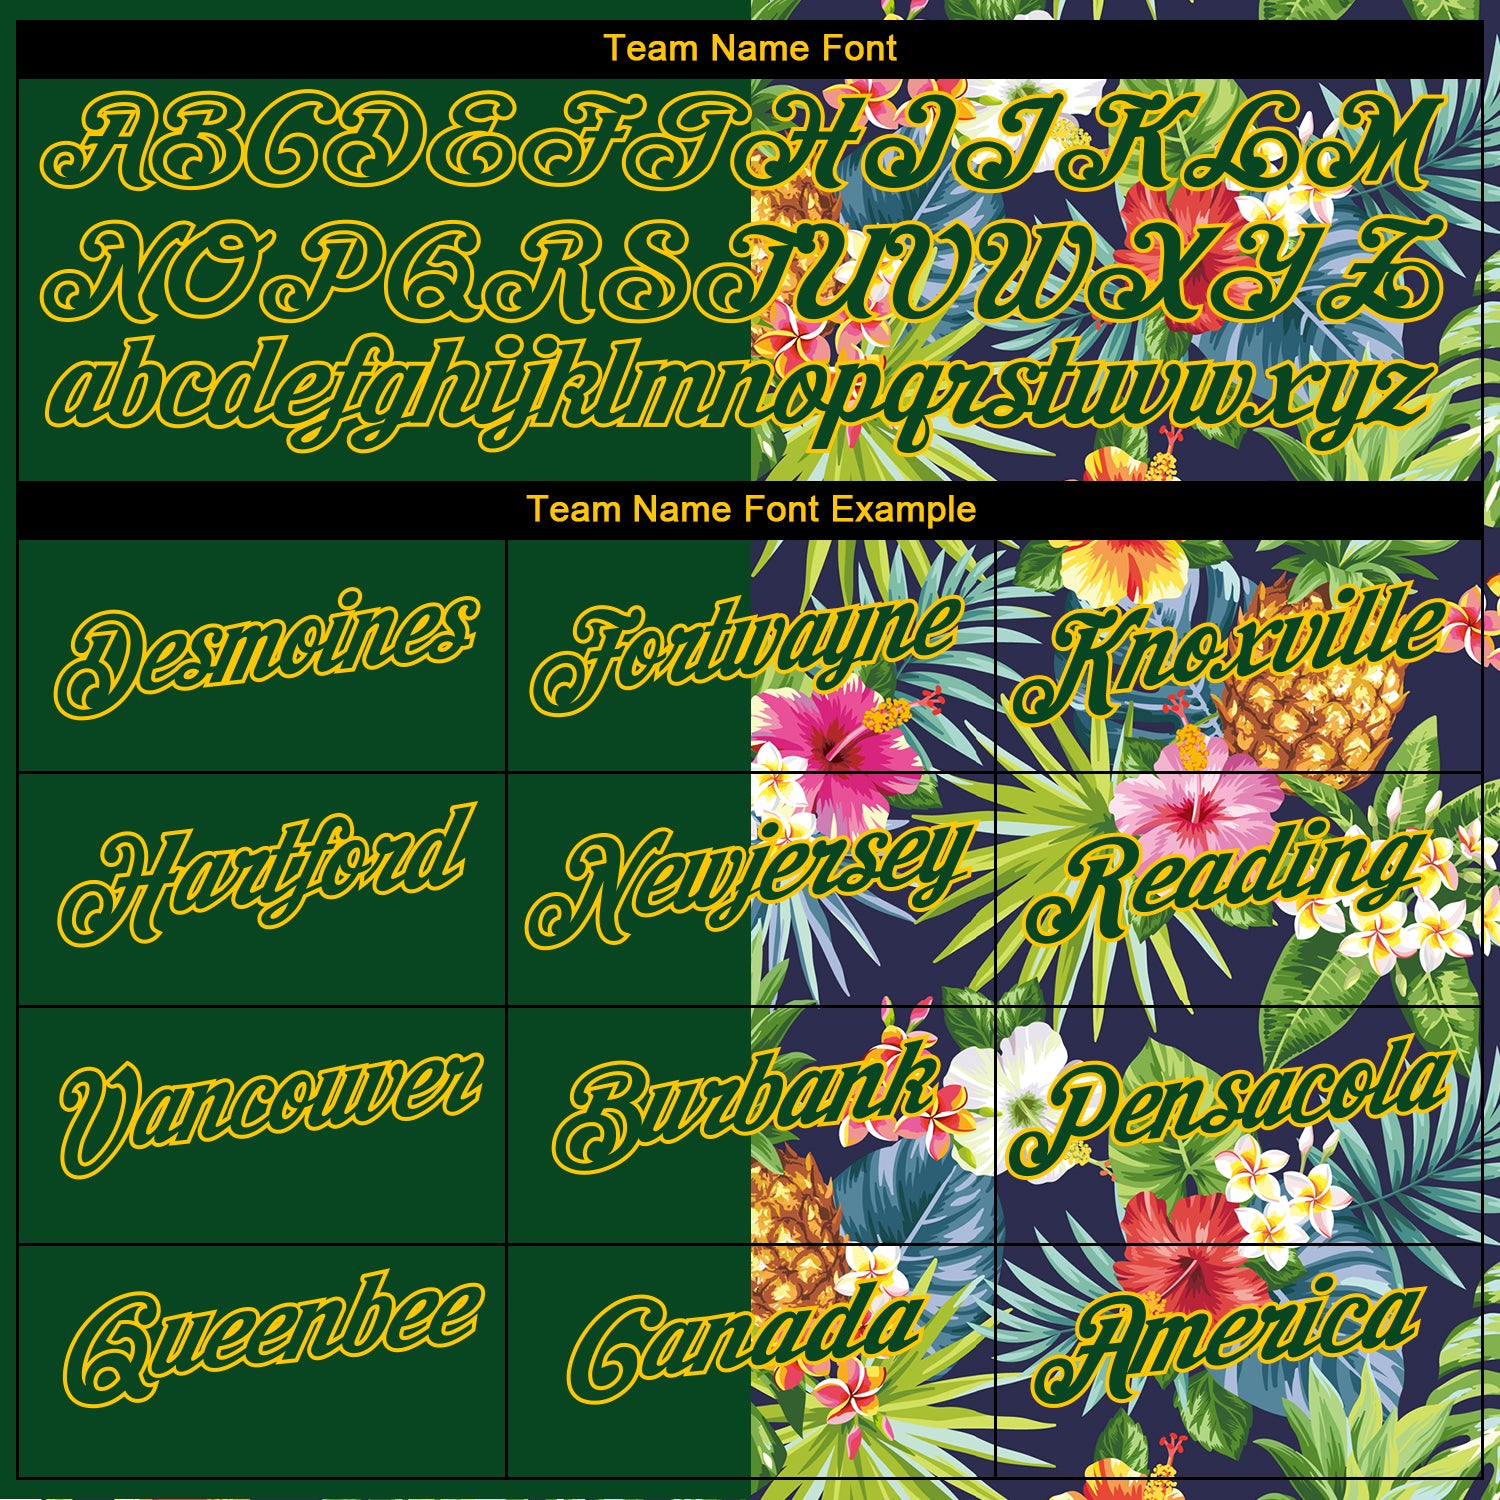 Custom 3D Pattern Design Tropical Pattern With Pineapples Palm Leaves And Flowers Performance T-Shirt